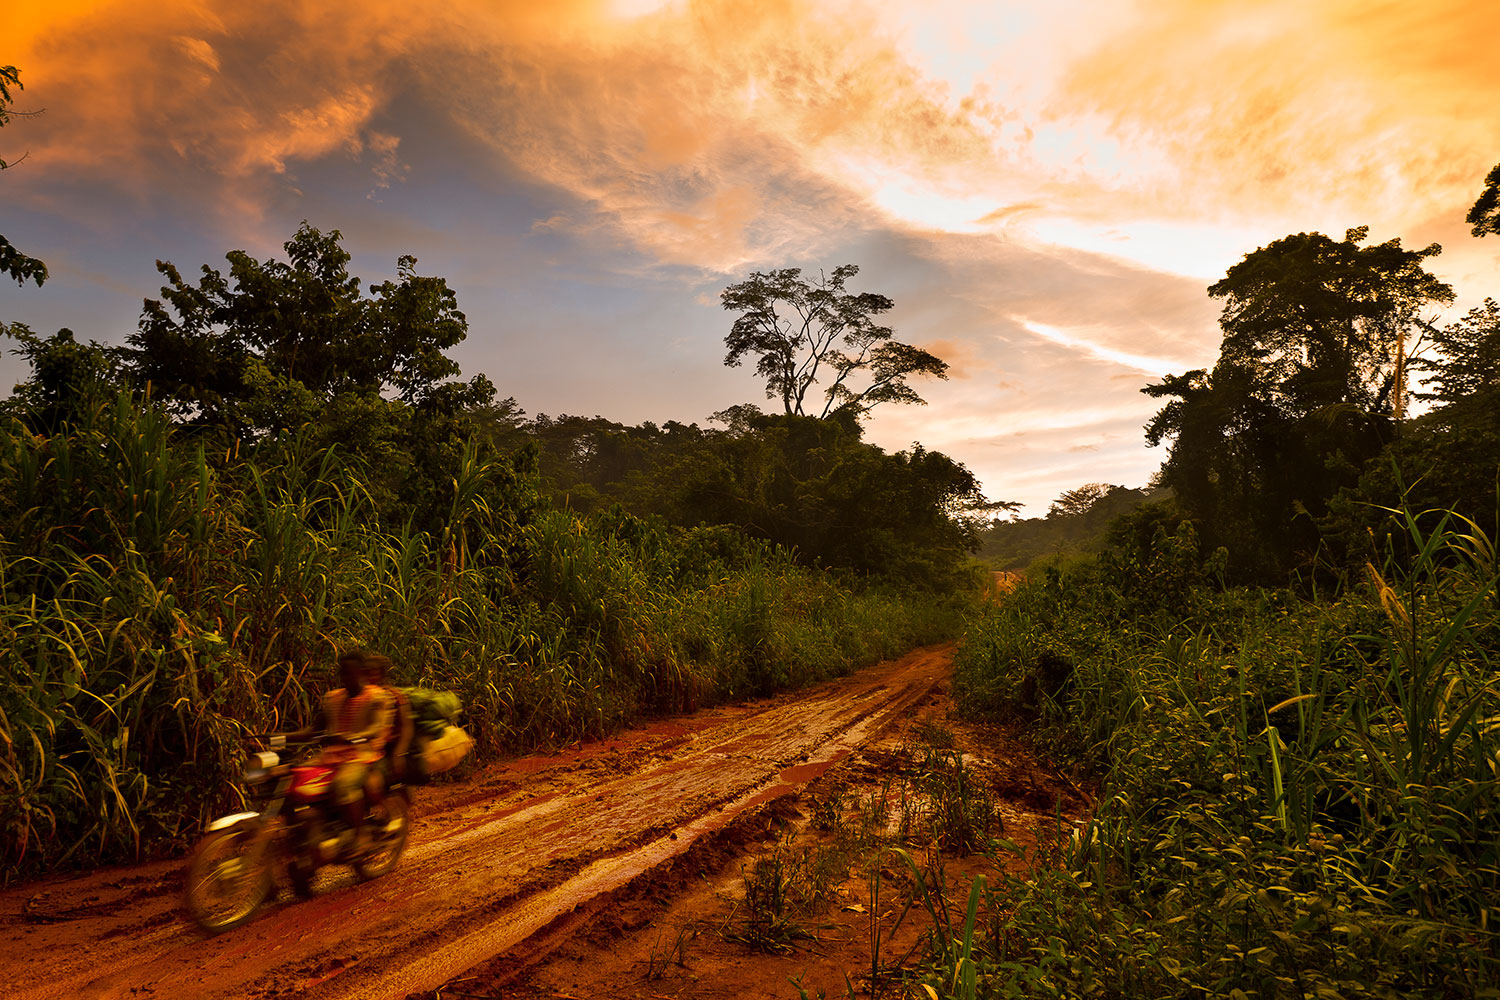 Locals travel down a logging road in the Kika region of Cameroon on June 6, 2010.